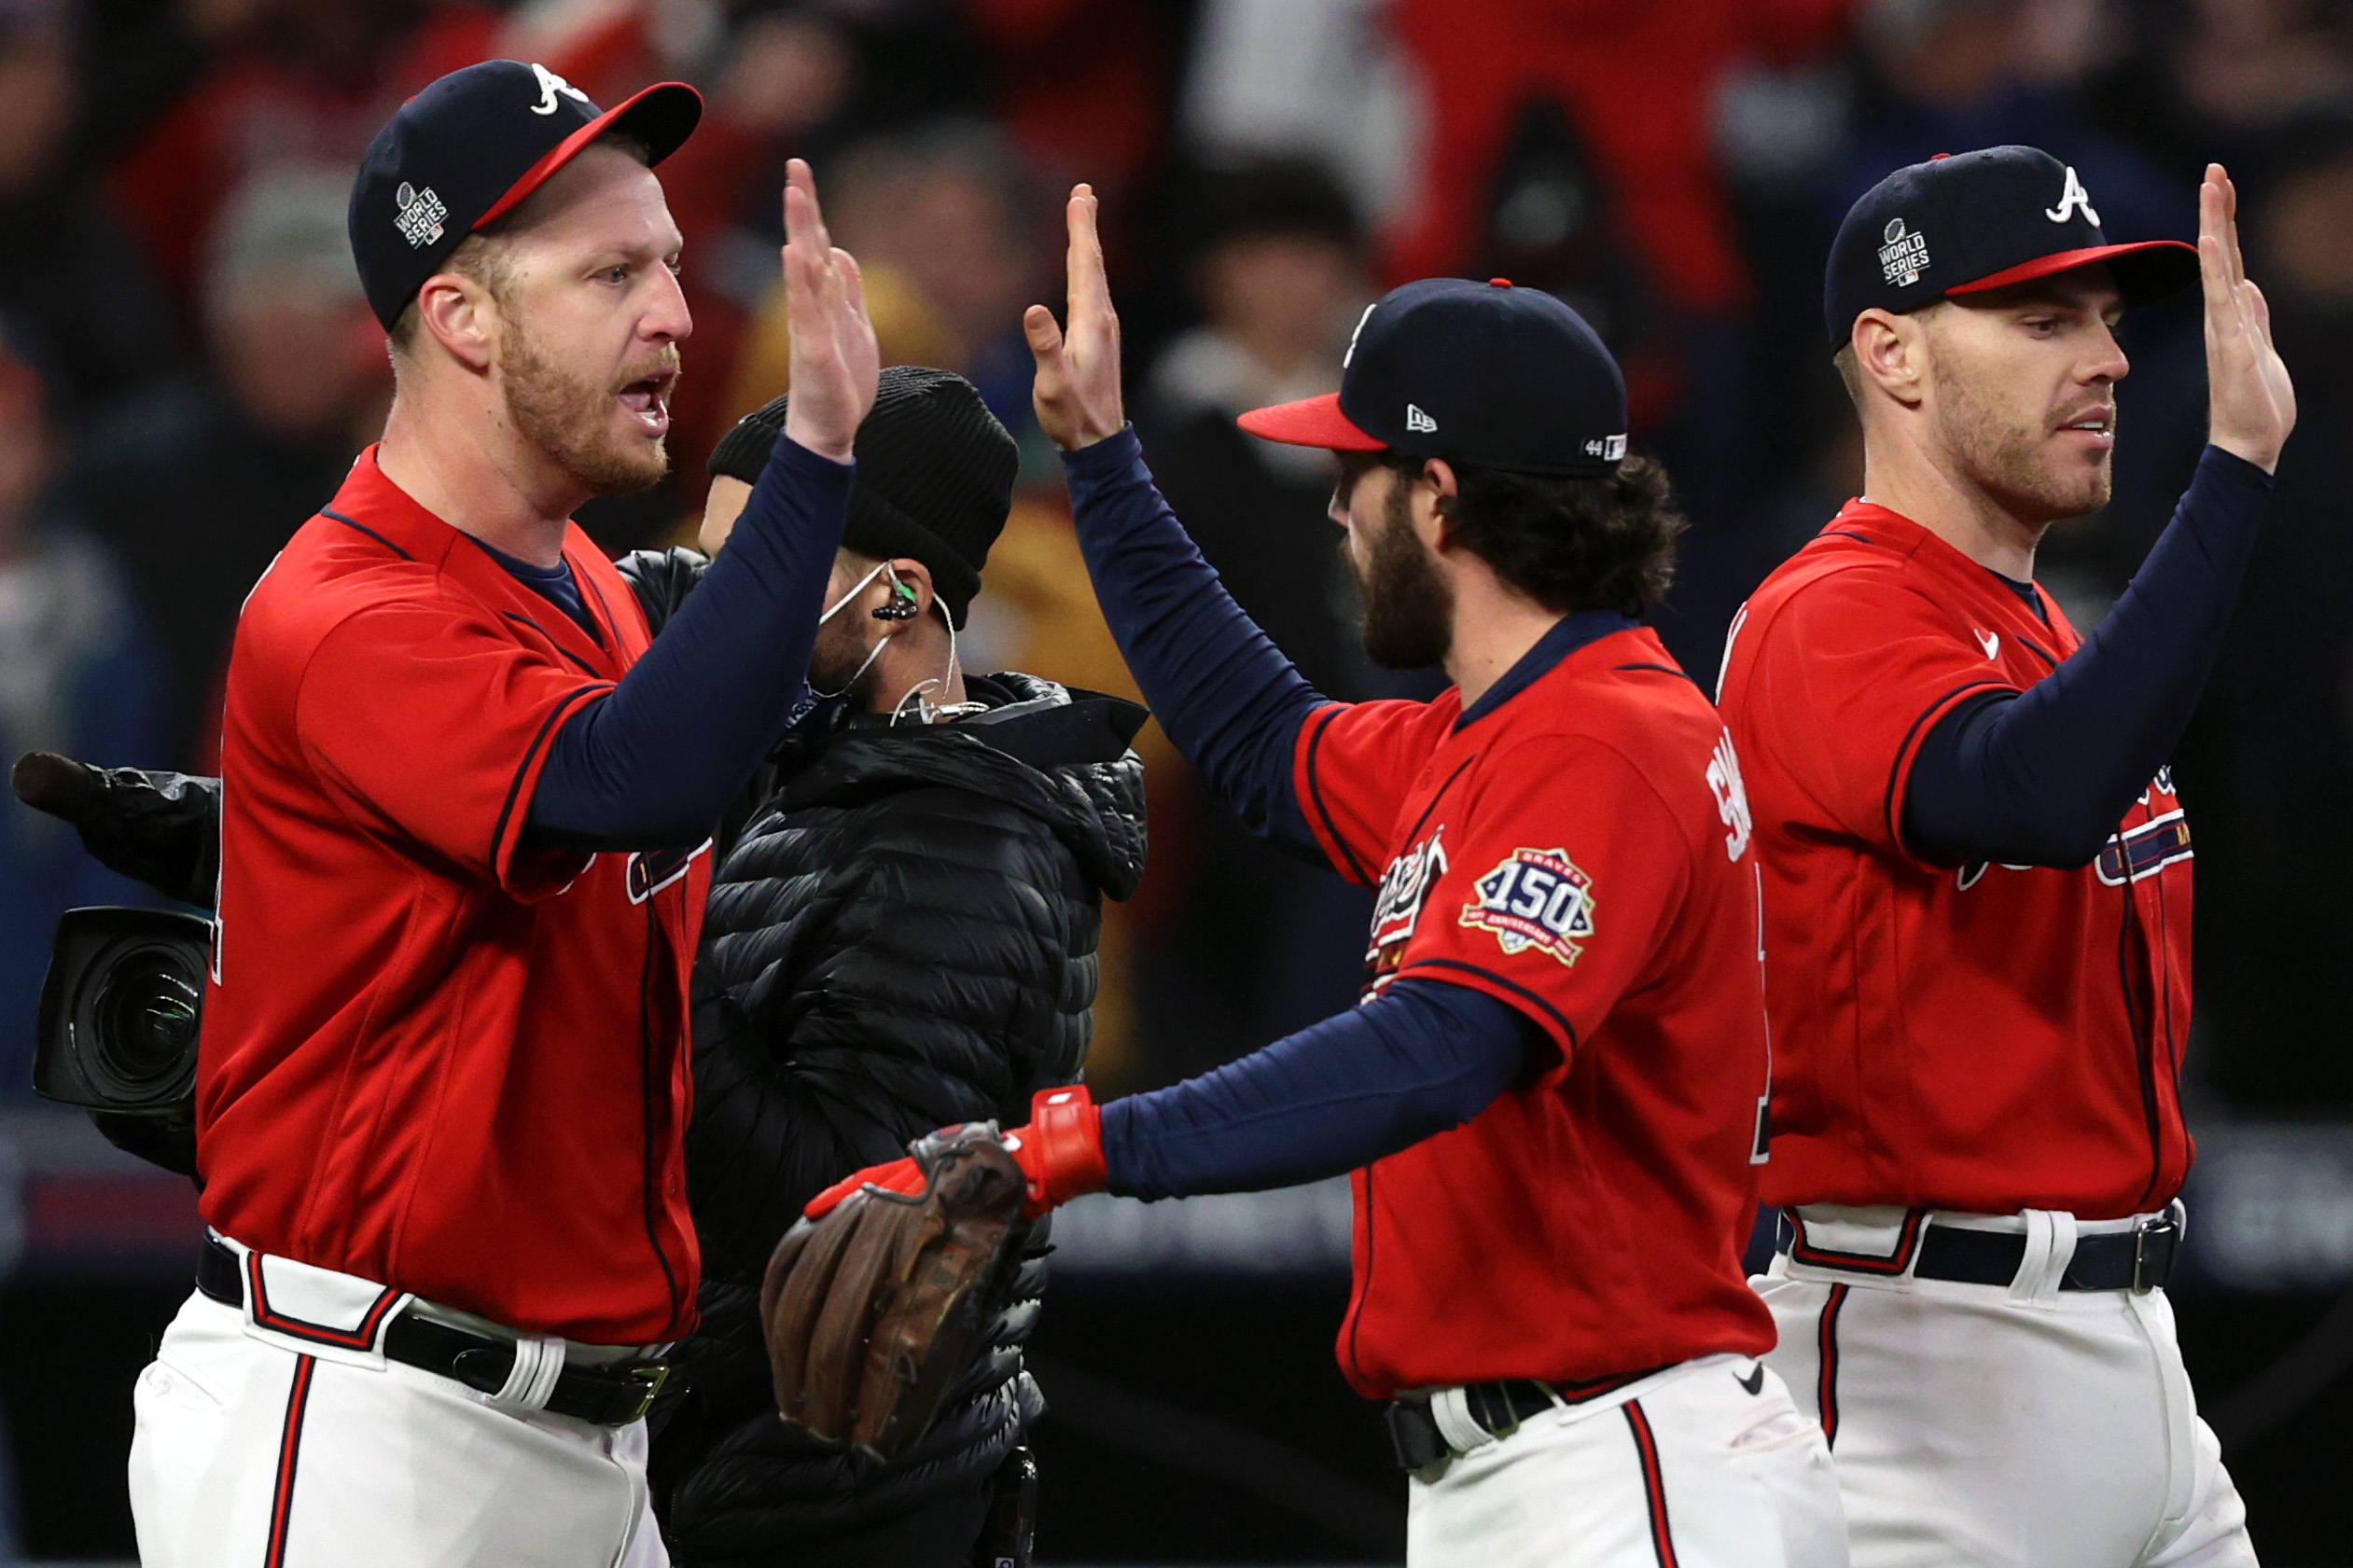 Atlanta Braves pitcher Will Smith, left, celebrate after they win Game Three against the Houston Astros.